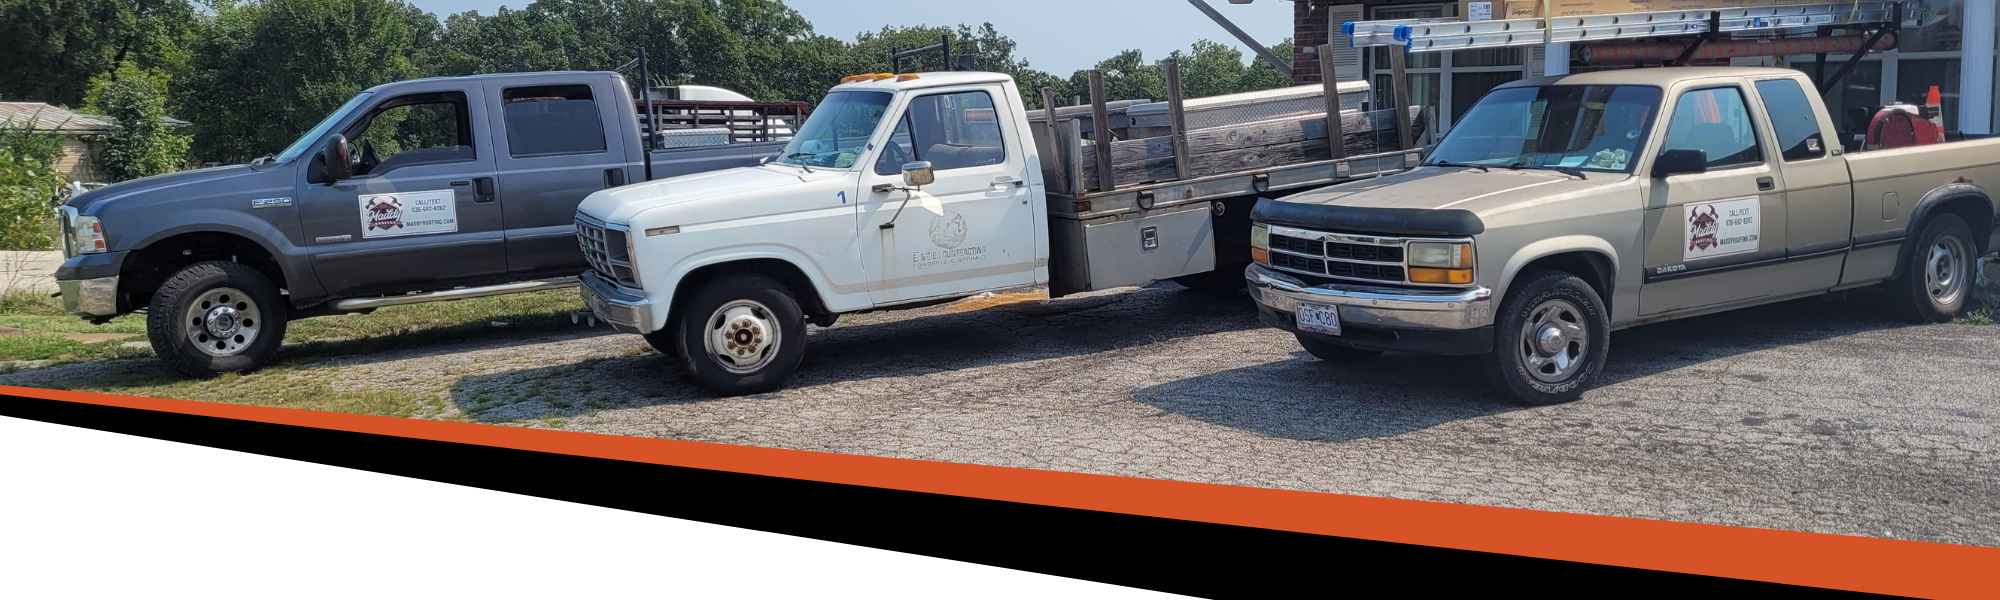 Maddy Roofing company trucks